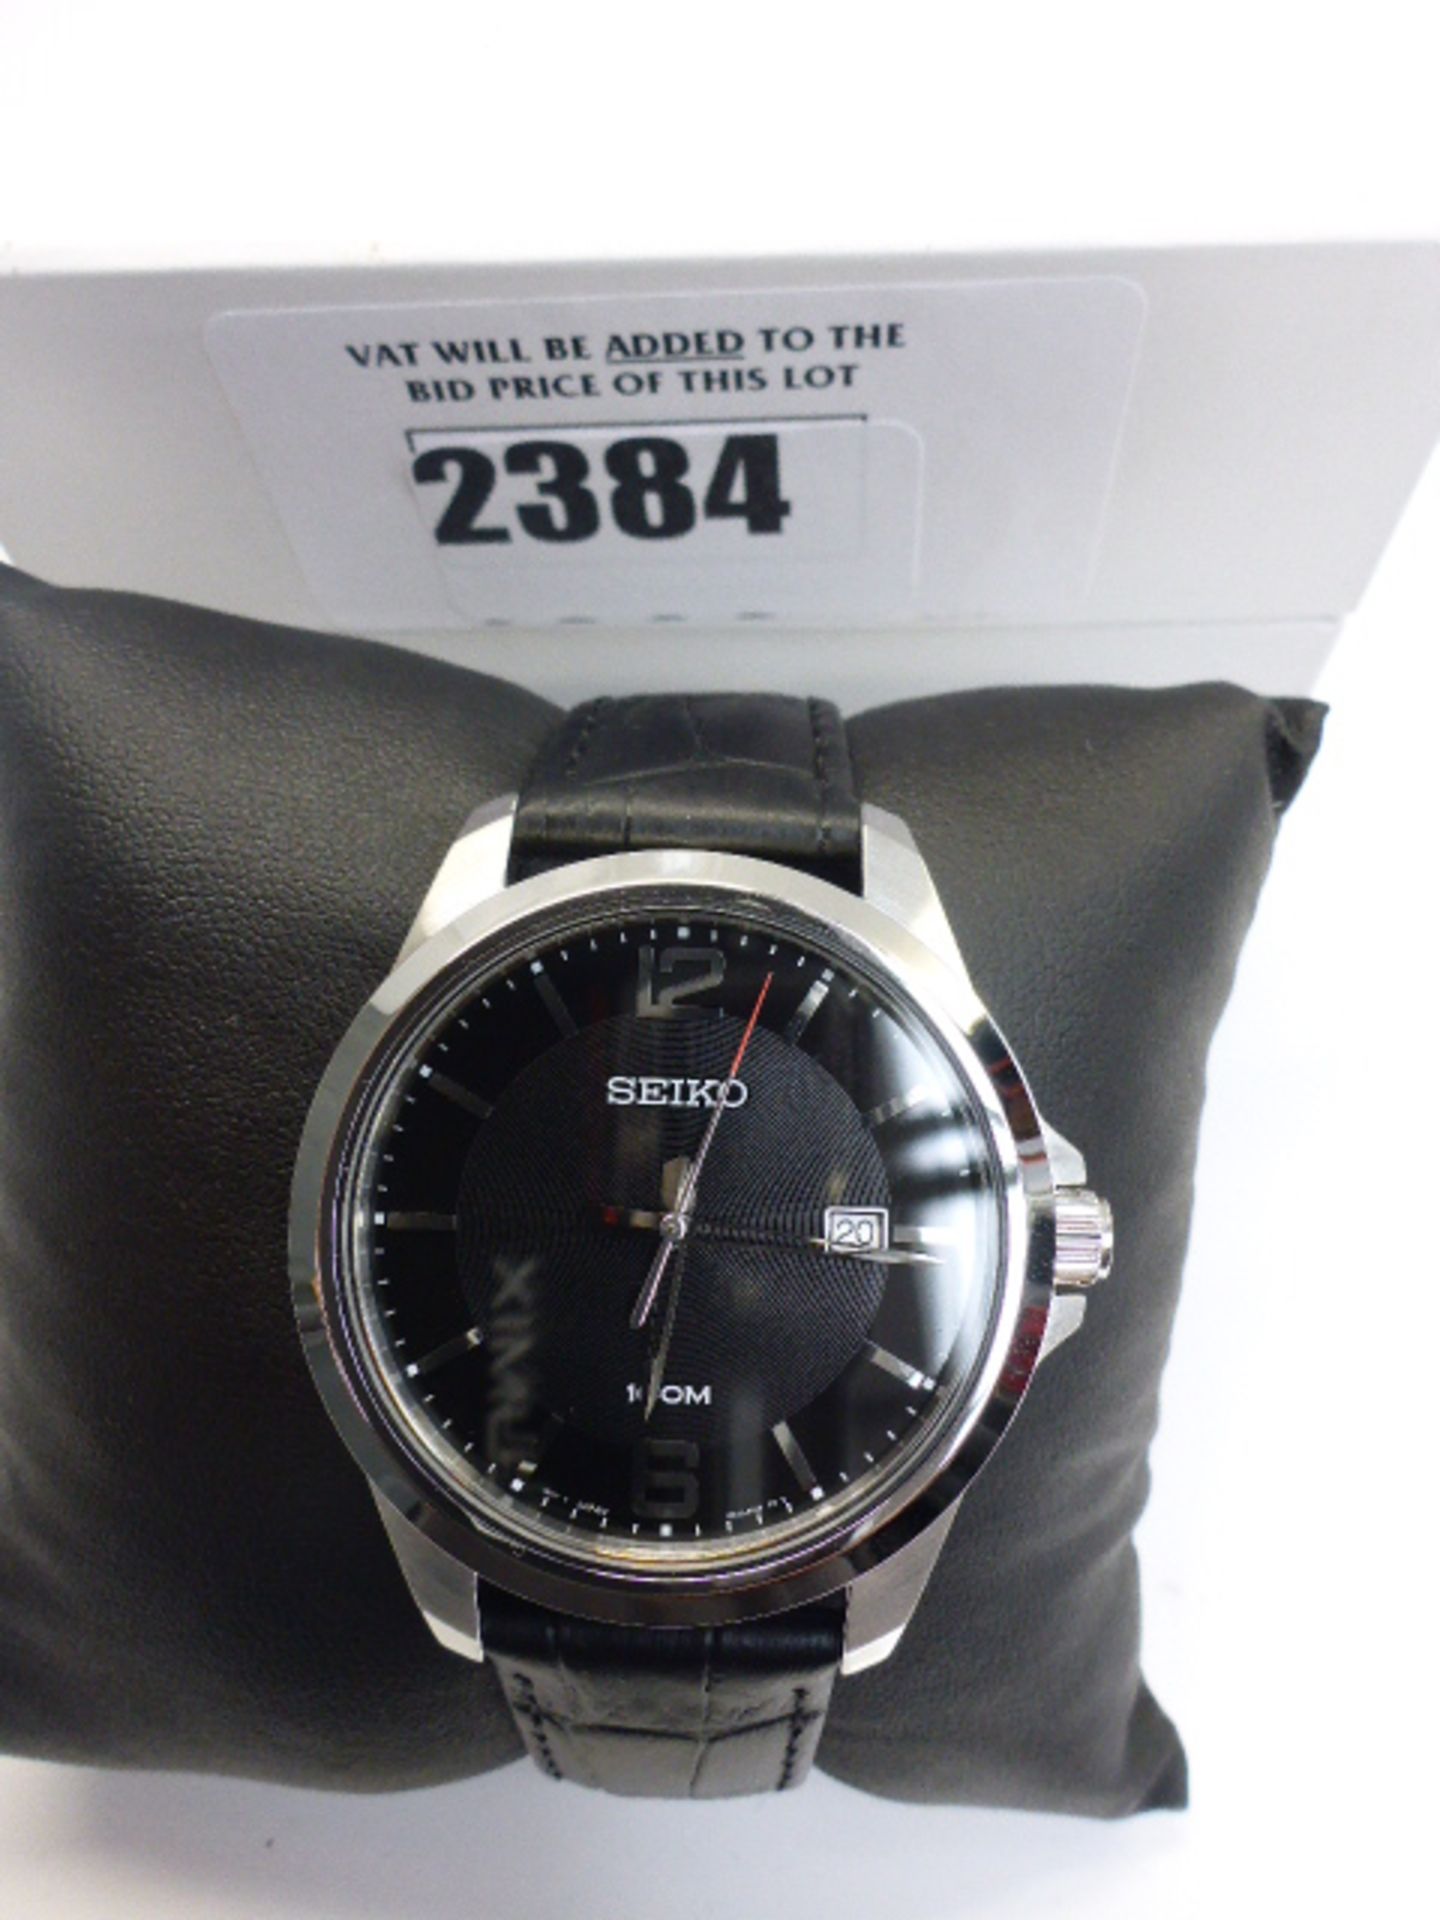 Seiko gents black leather strap watch with box.